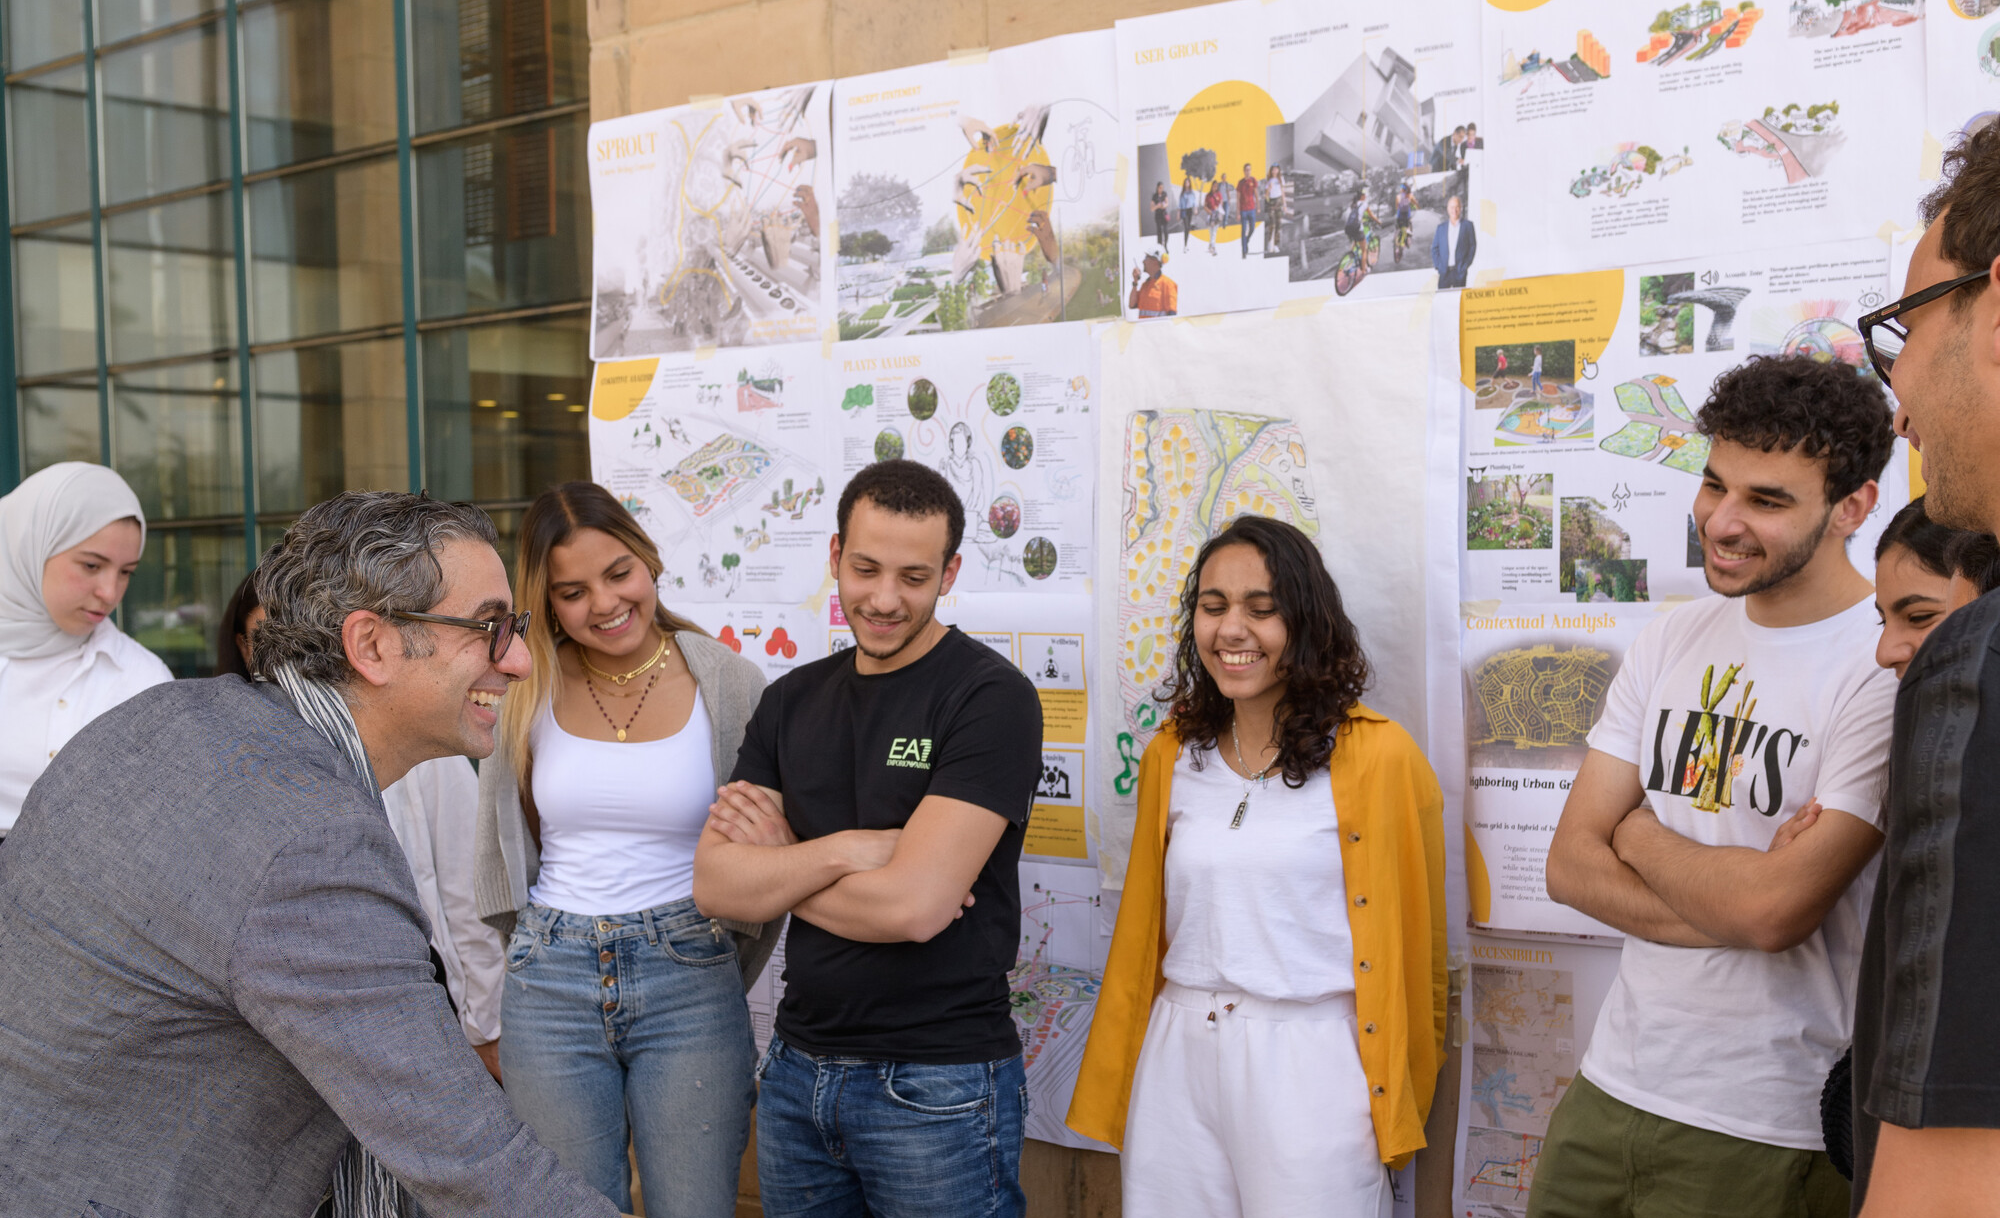 architect professor explaining to students and smiling faces